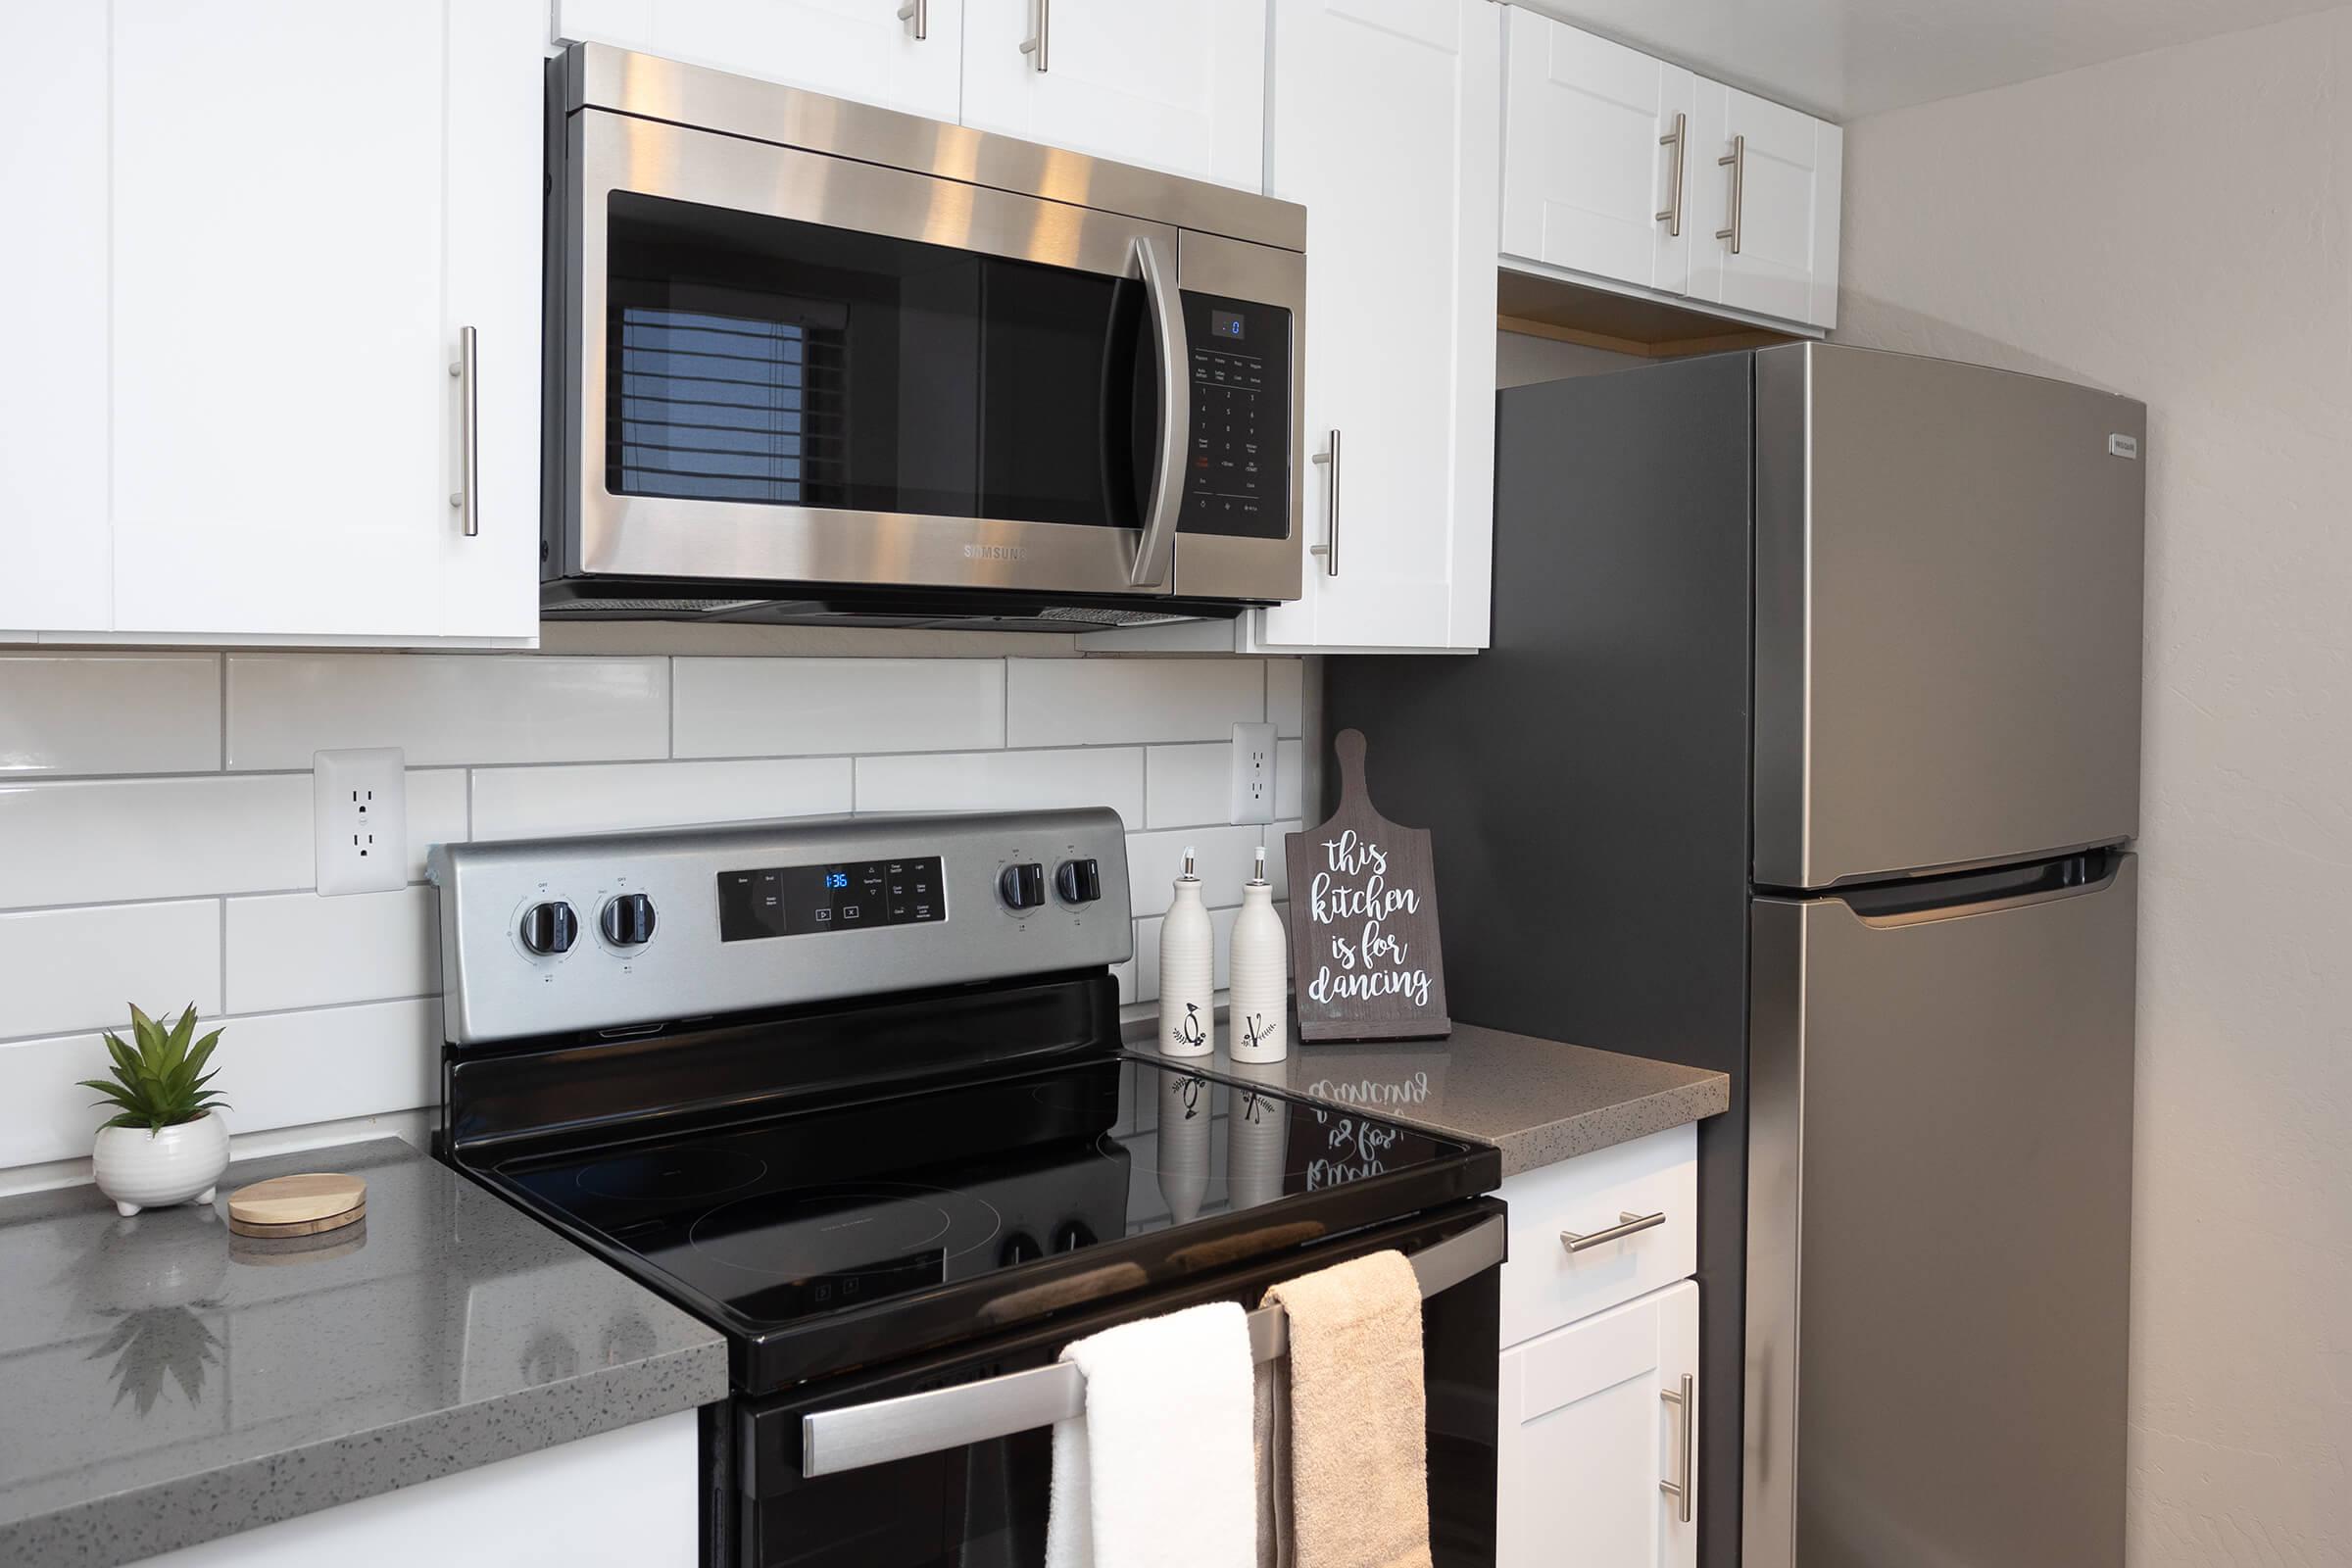 STAINLESS STEEL APPLIANCES LIKE A MICROWAVE AND REFRIGERATOR